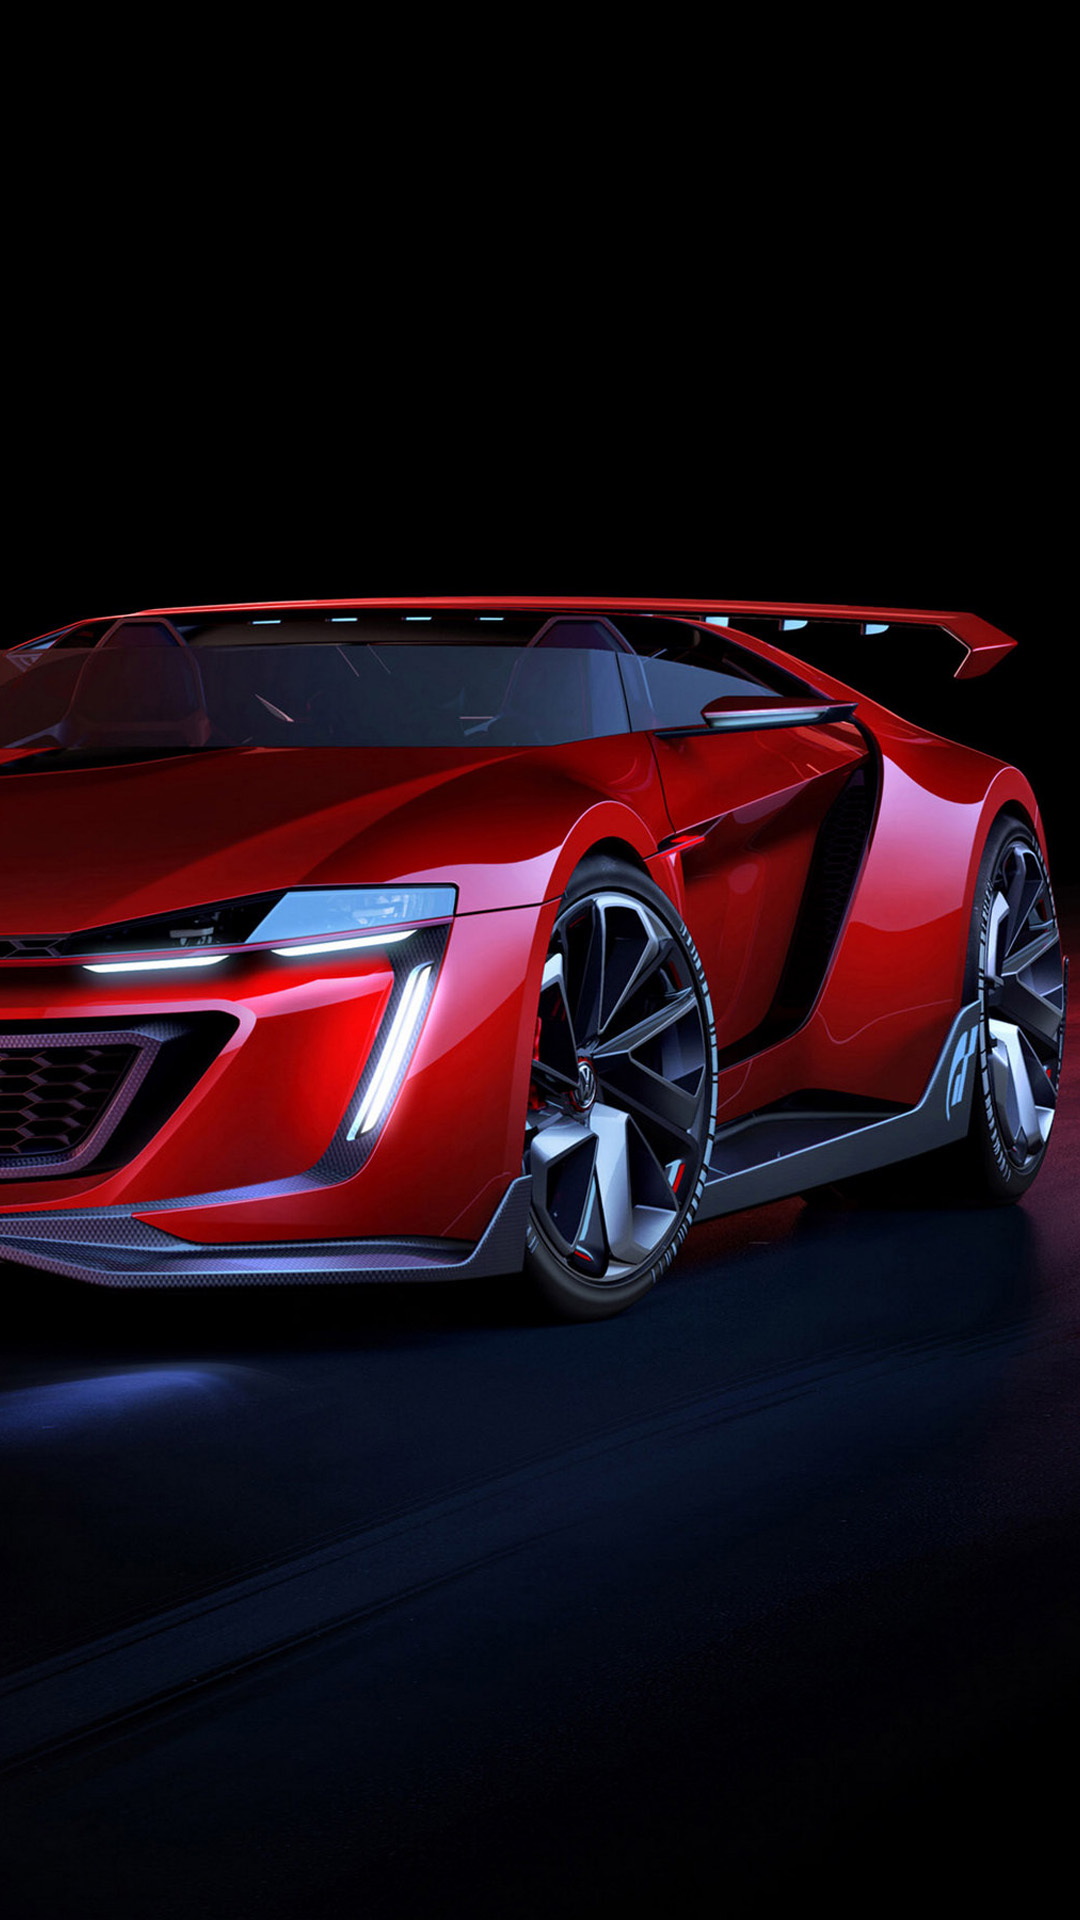 Pretty Volkswagen Gti Roadster Positive Android Wallpaper - Cool Backgrounds For Iphone 6s Car - HD Wallpaper 